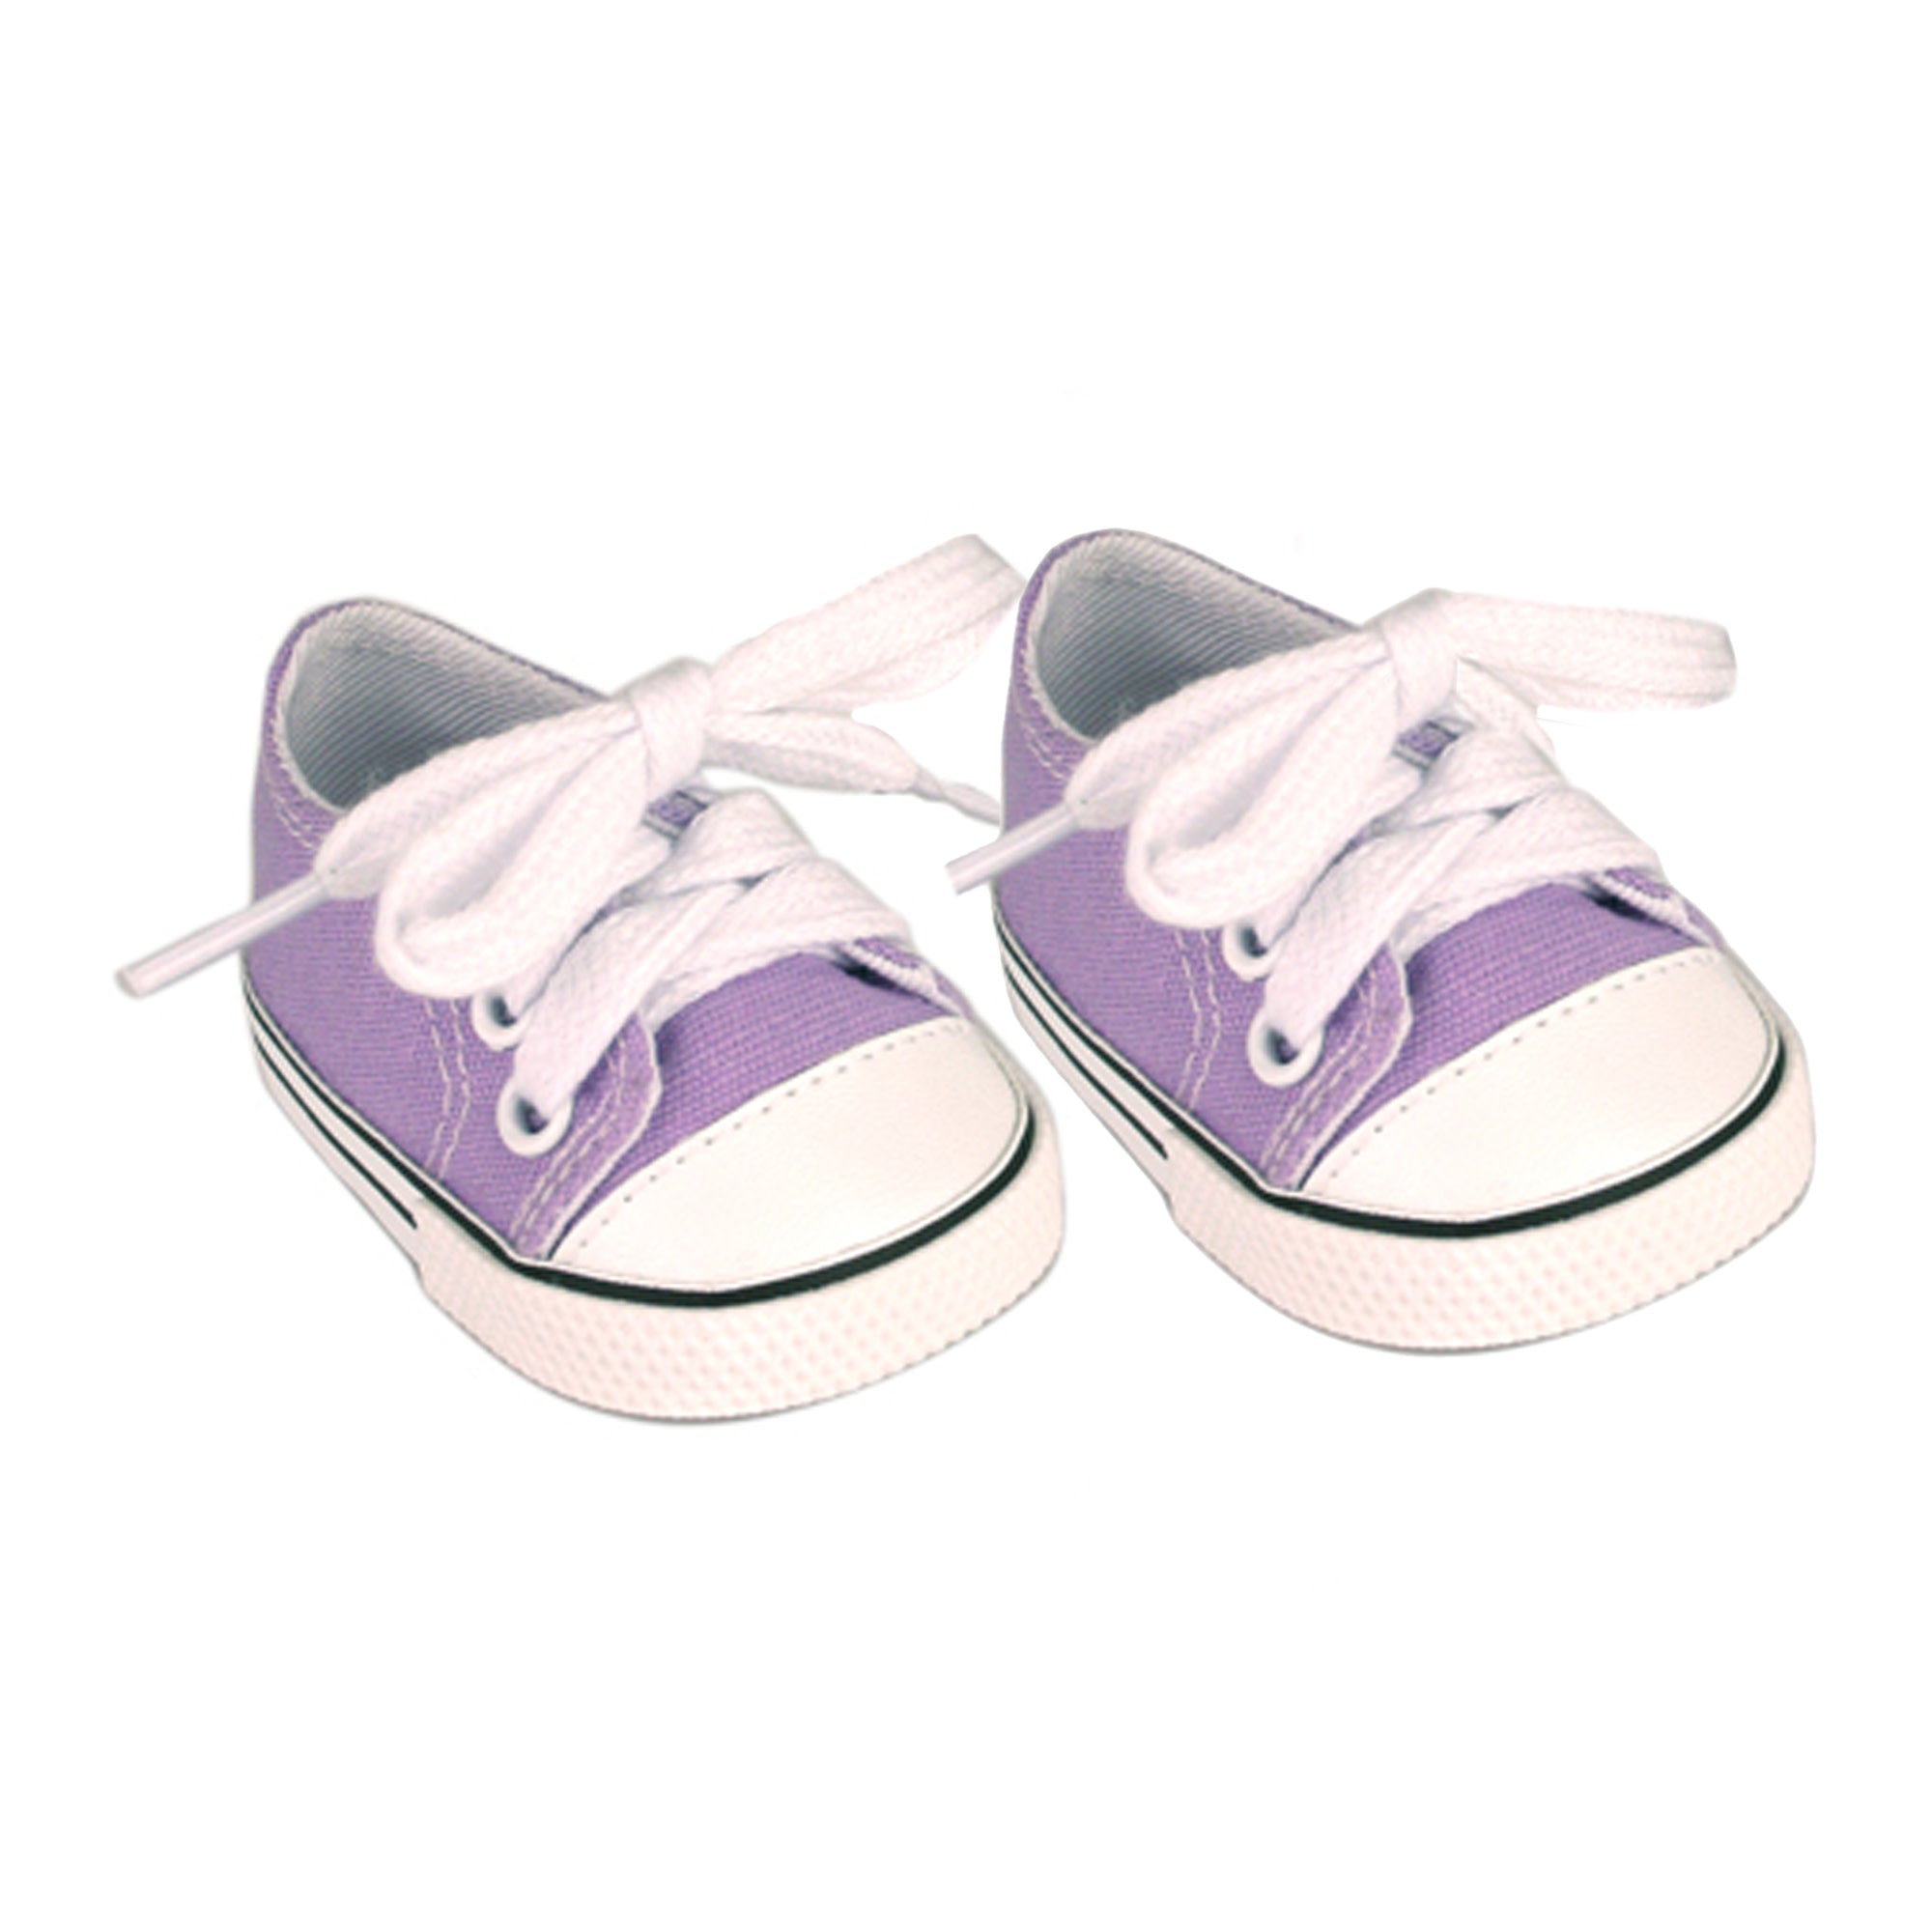 Sophia’s Cute Low-Top Canvas Sneakers for 18” Boy or Girl Dolls, Lavender